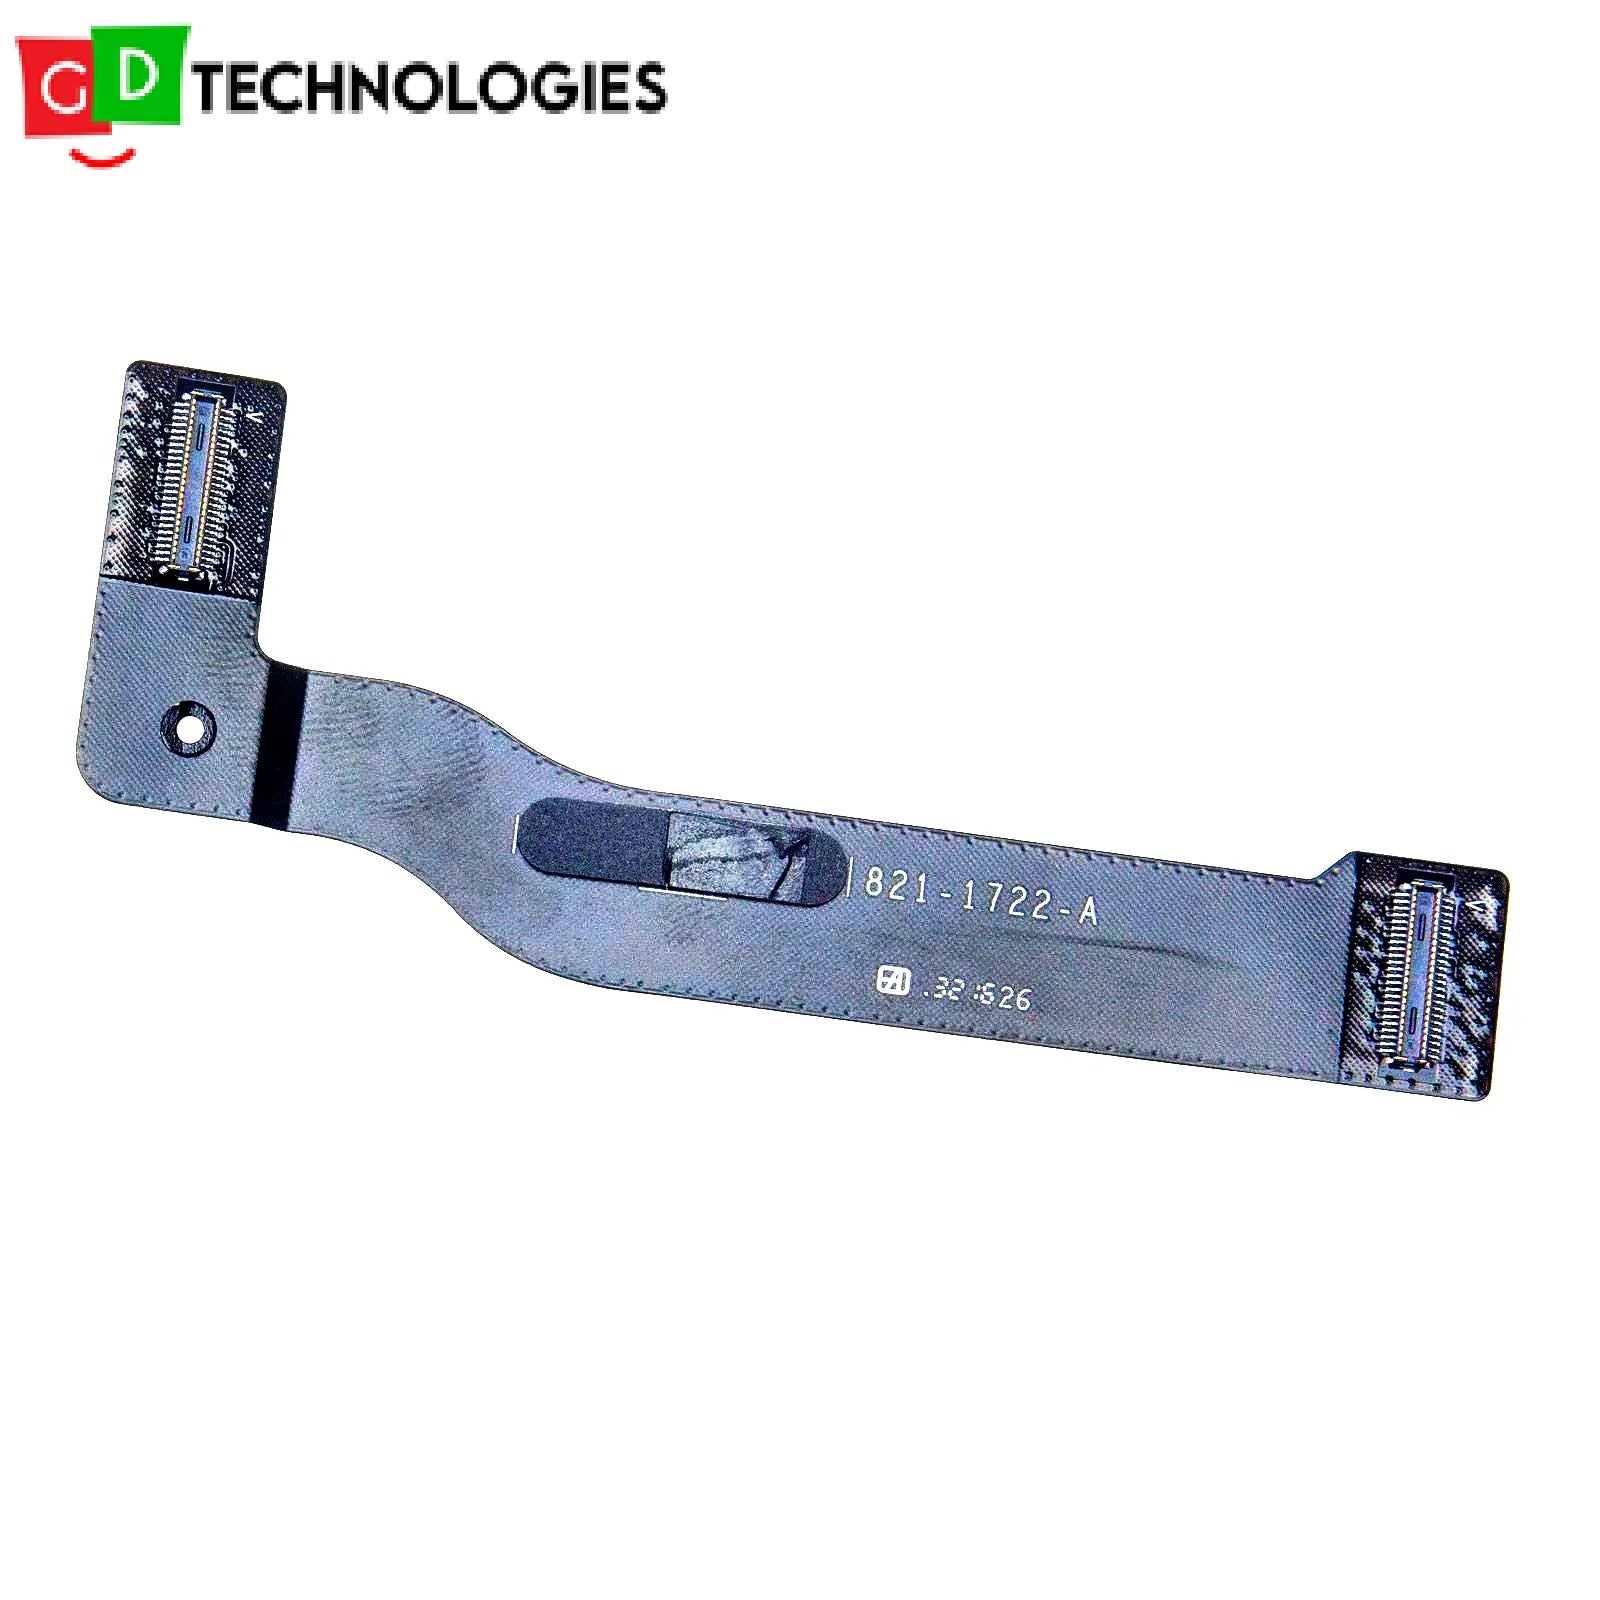 A1466 I/O Board Flex Cable for Apple MacBook Air 13 inch A1466 Mid 2013, A1466 Early 2014, A1466 Early 2015, A1466 Early Mid 2016, A1466 Mid 2017 Used